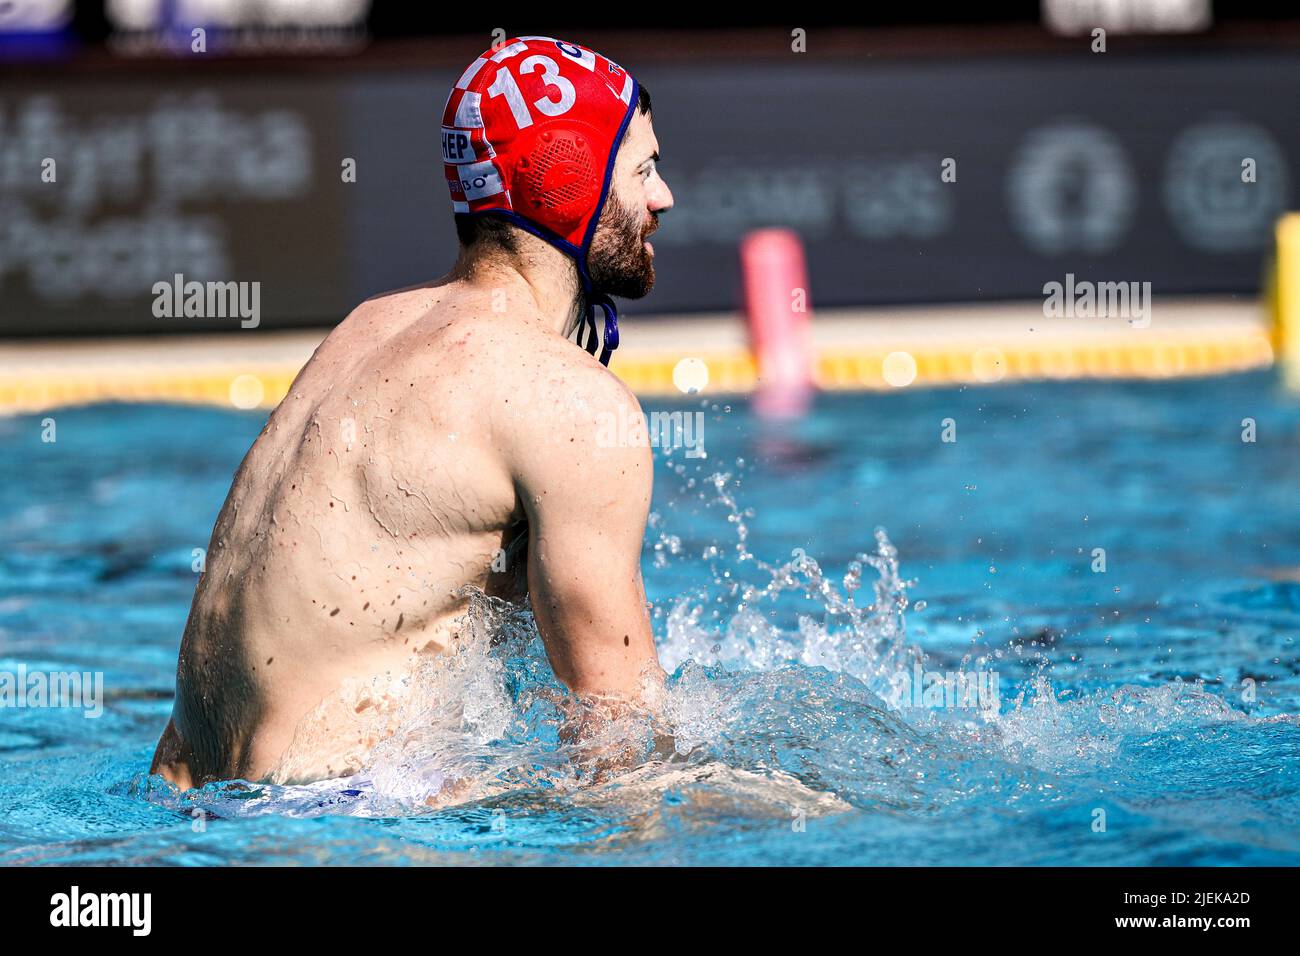 BUDAPEST, HUNGARY - JUNE 27: Toni Popadic of Croatia during the FINA World Championships Budapest 2022 1/8 finals match between Georgia and Croatia on June 27, 2022 in Budapest, Hungary (Photo by Albert ten Hove/Orange Pictures) Stock Photo